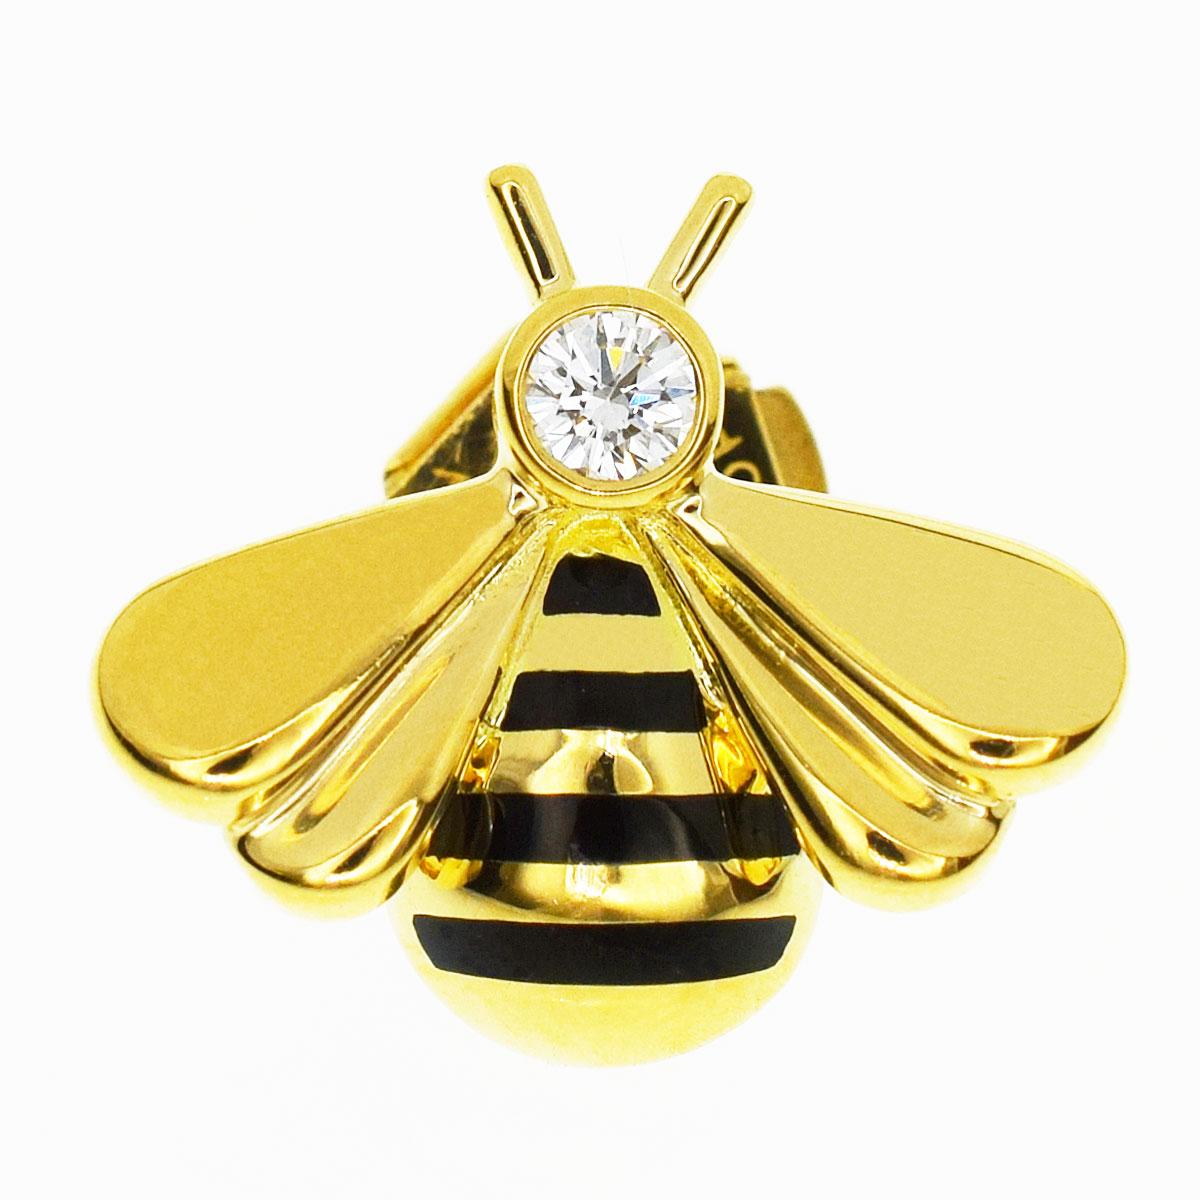 Brand:Cartier
Name:Bee pin brooch
Material:1P Diamond, 750 K18 YG Yellow Gold
Comes with:Cartier pouch, Cartier repair certificate (April 2019)
Size(inch):W16.66mm×H14.53mm  0.65